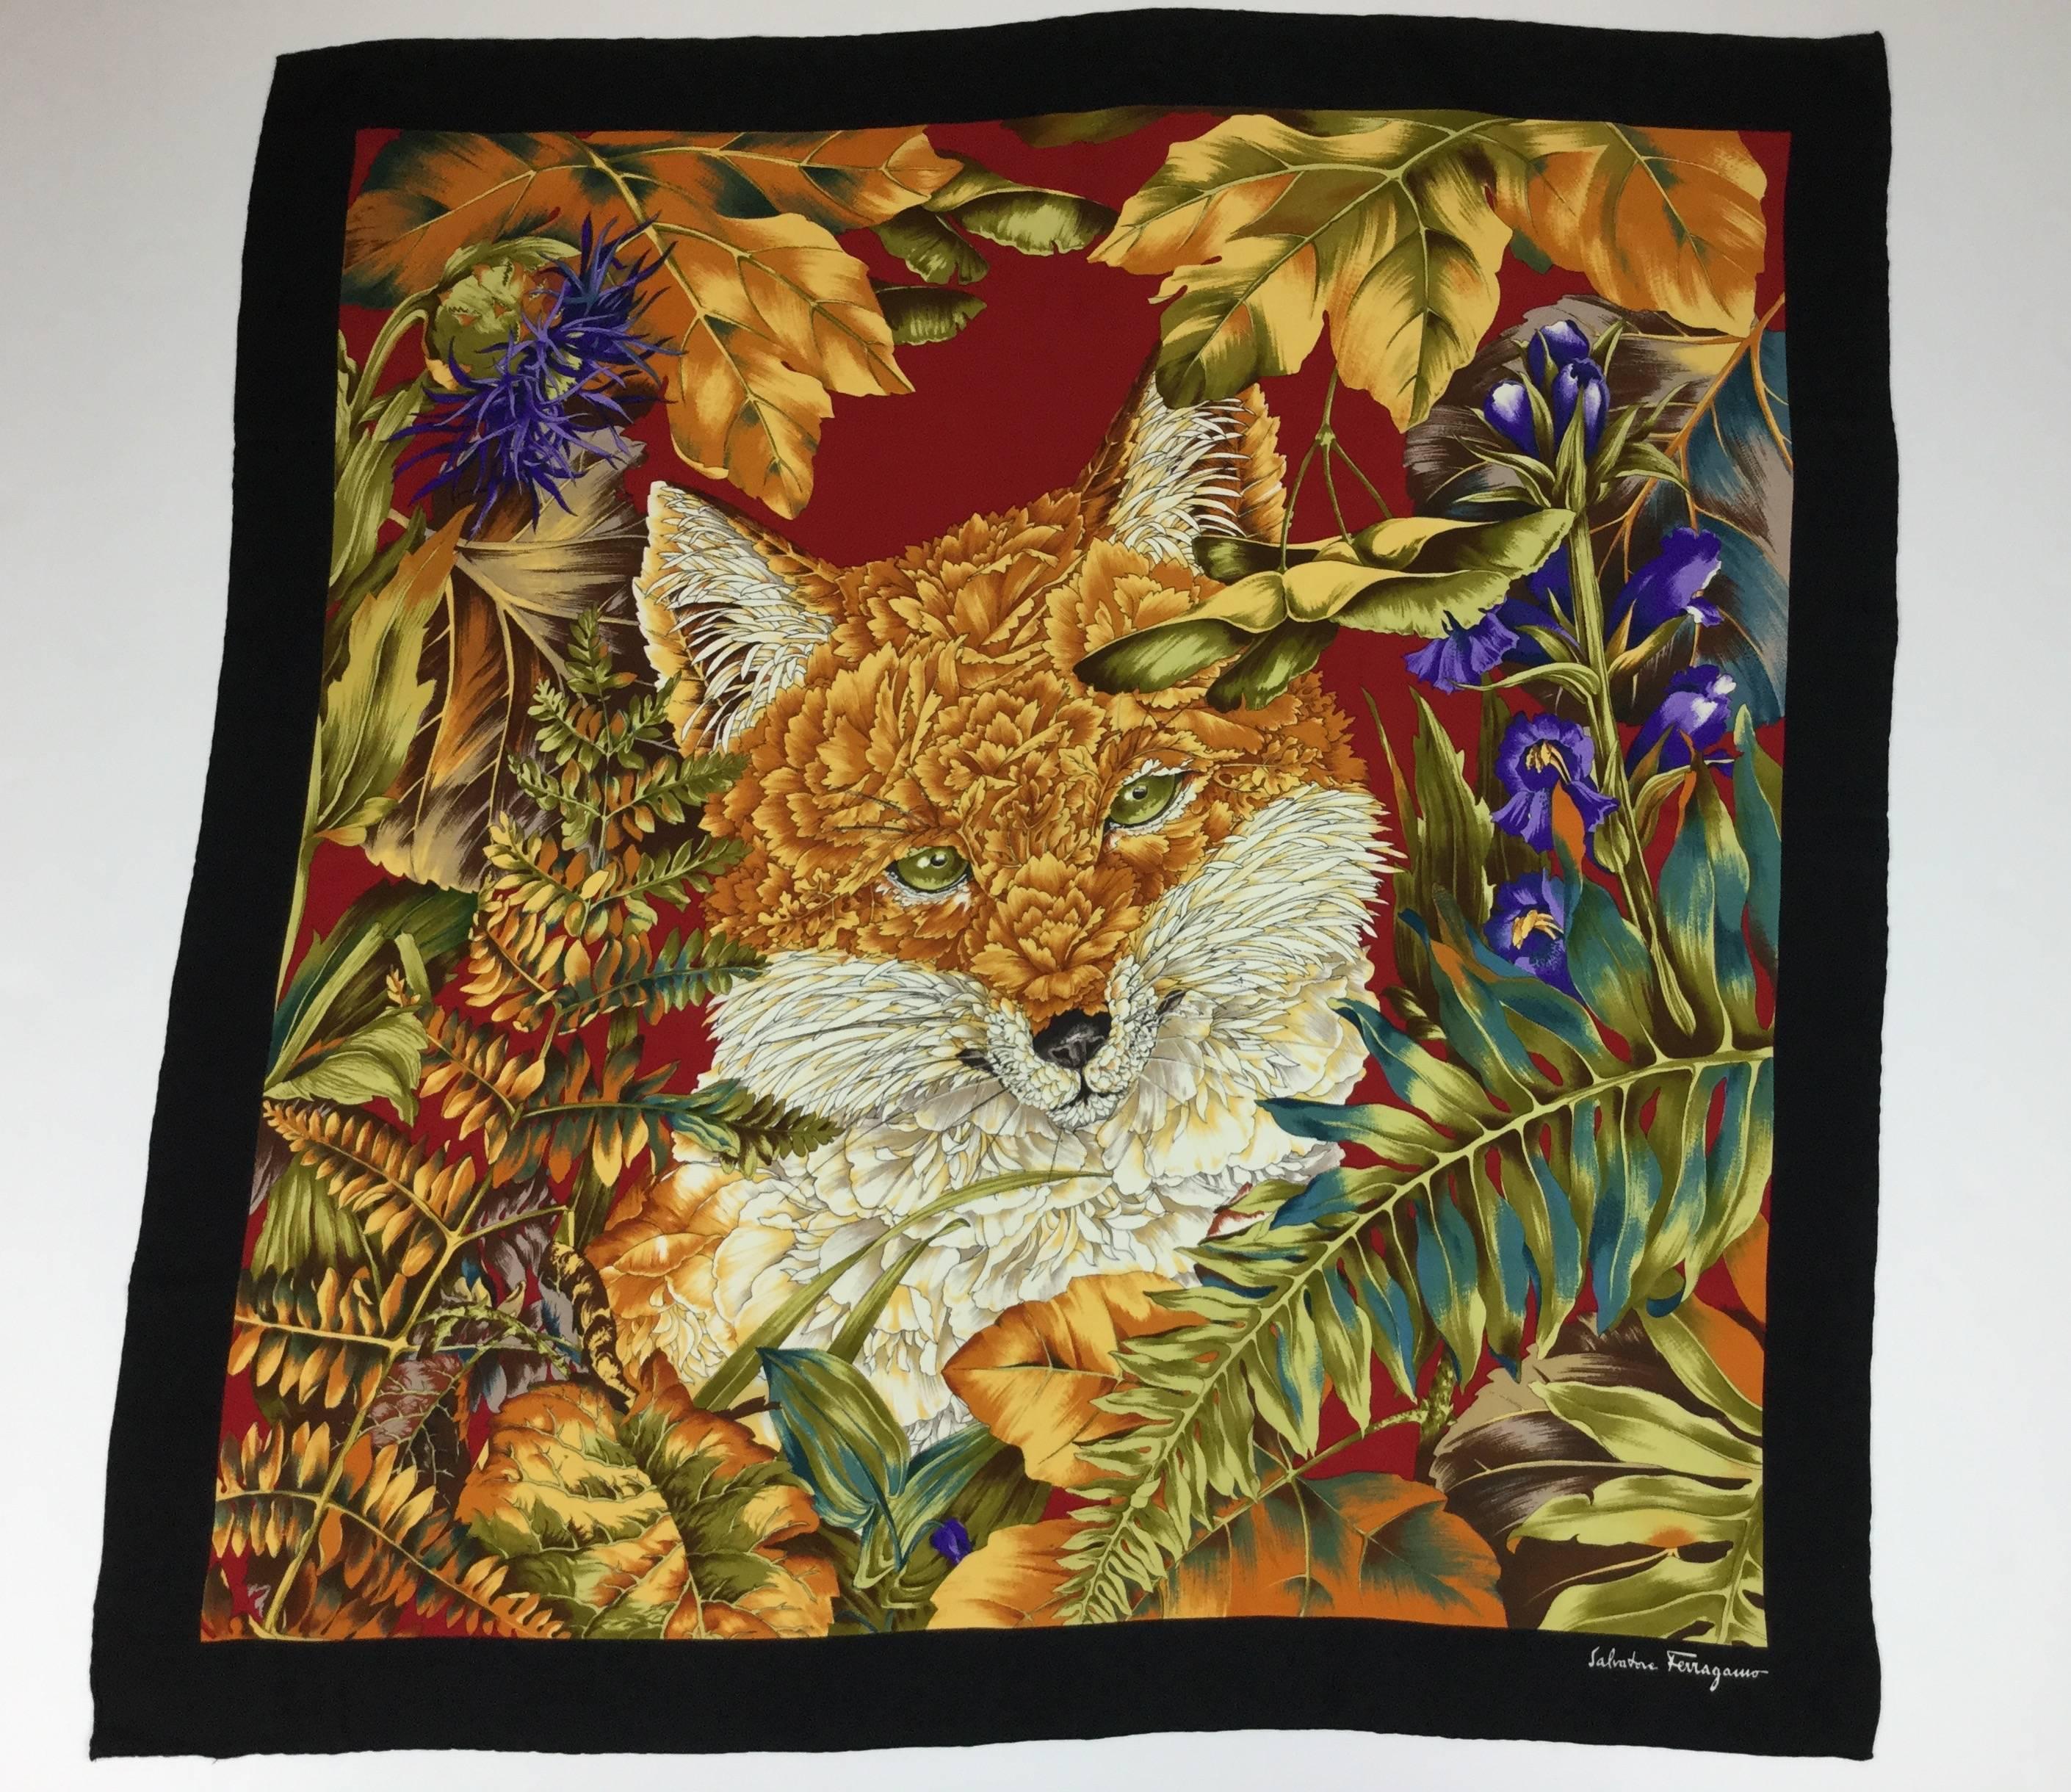 This Ferragamo scarf is so intricate and lush. The green eyed fox has auburn and creme carnation petals for fur.  She gazes from a frame of Iris blooms and
autumn toned leaves. The detail is simply stunning. It is 32 inches by 32 inches;
so large